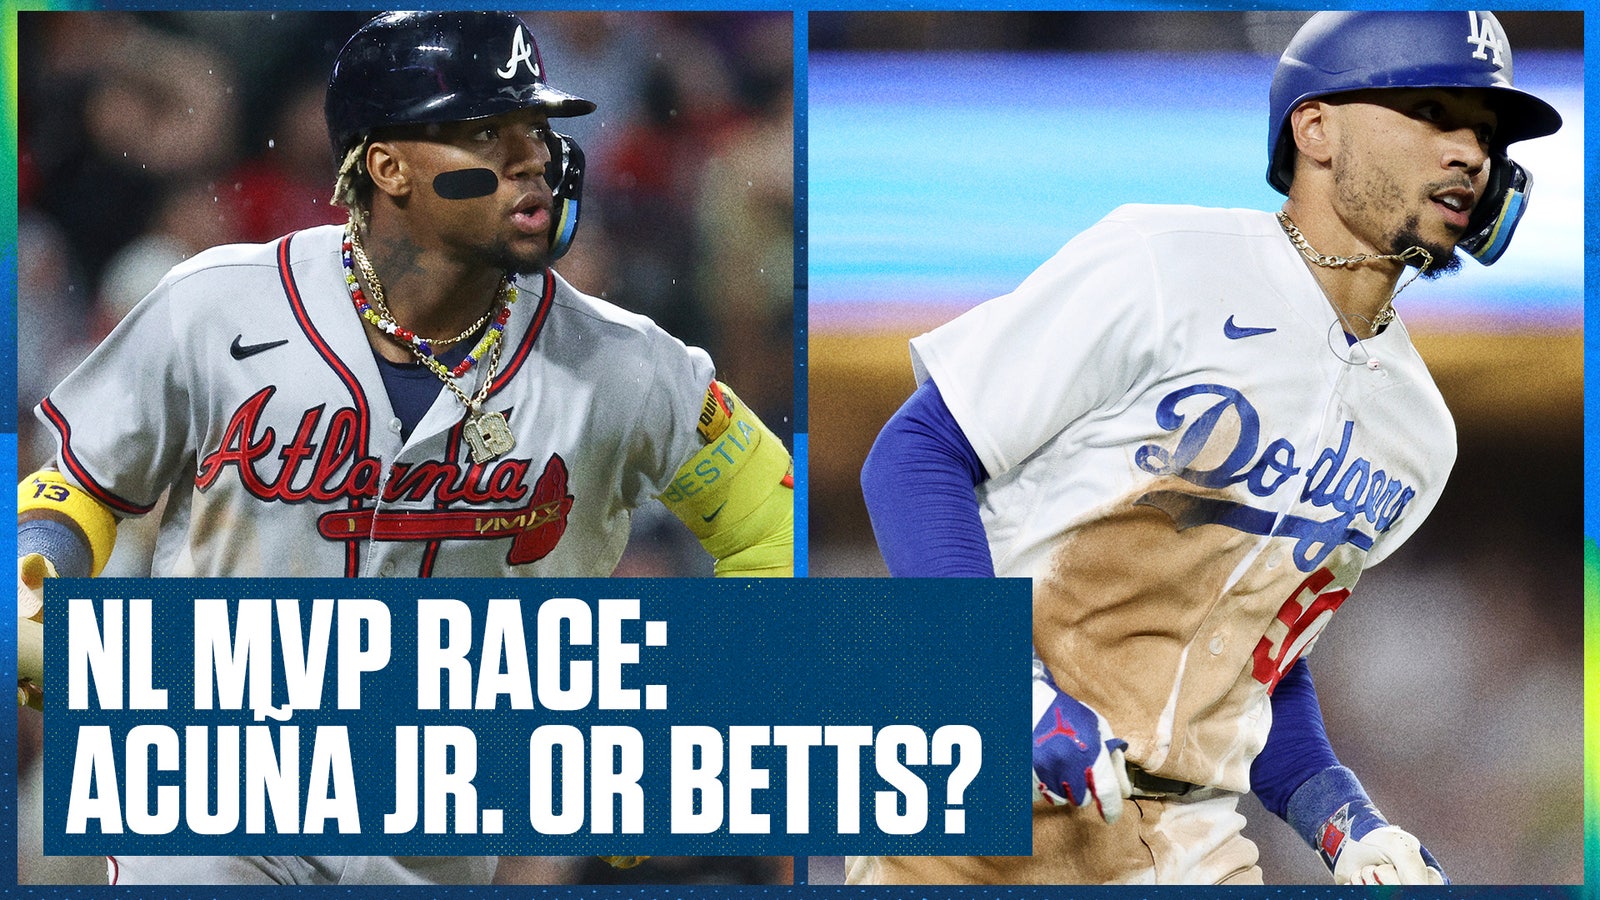 Braves' Ronald Acuña Jr. or Dodgers' Mookie Betts for NL MVP?